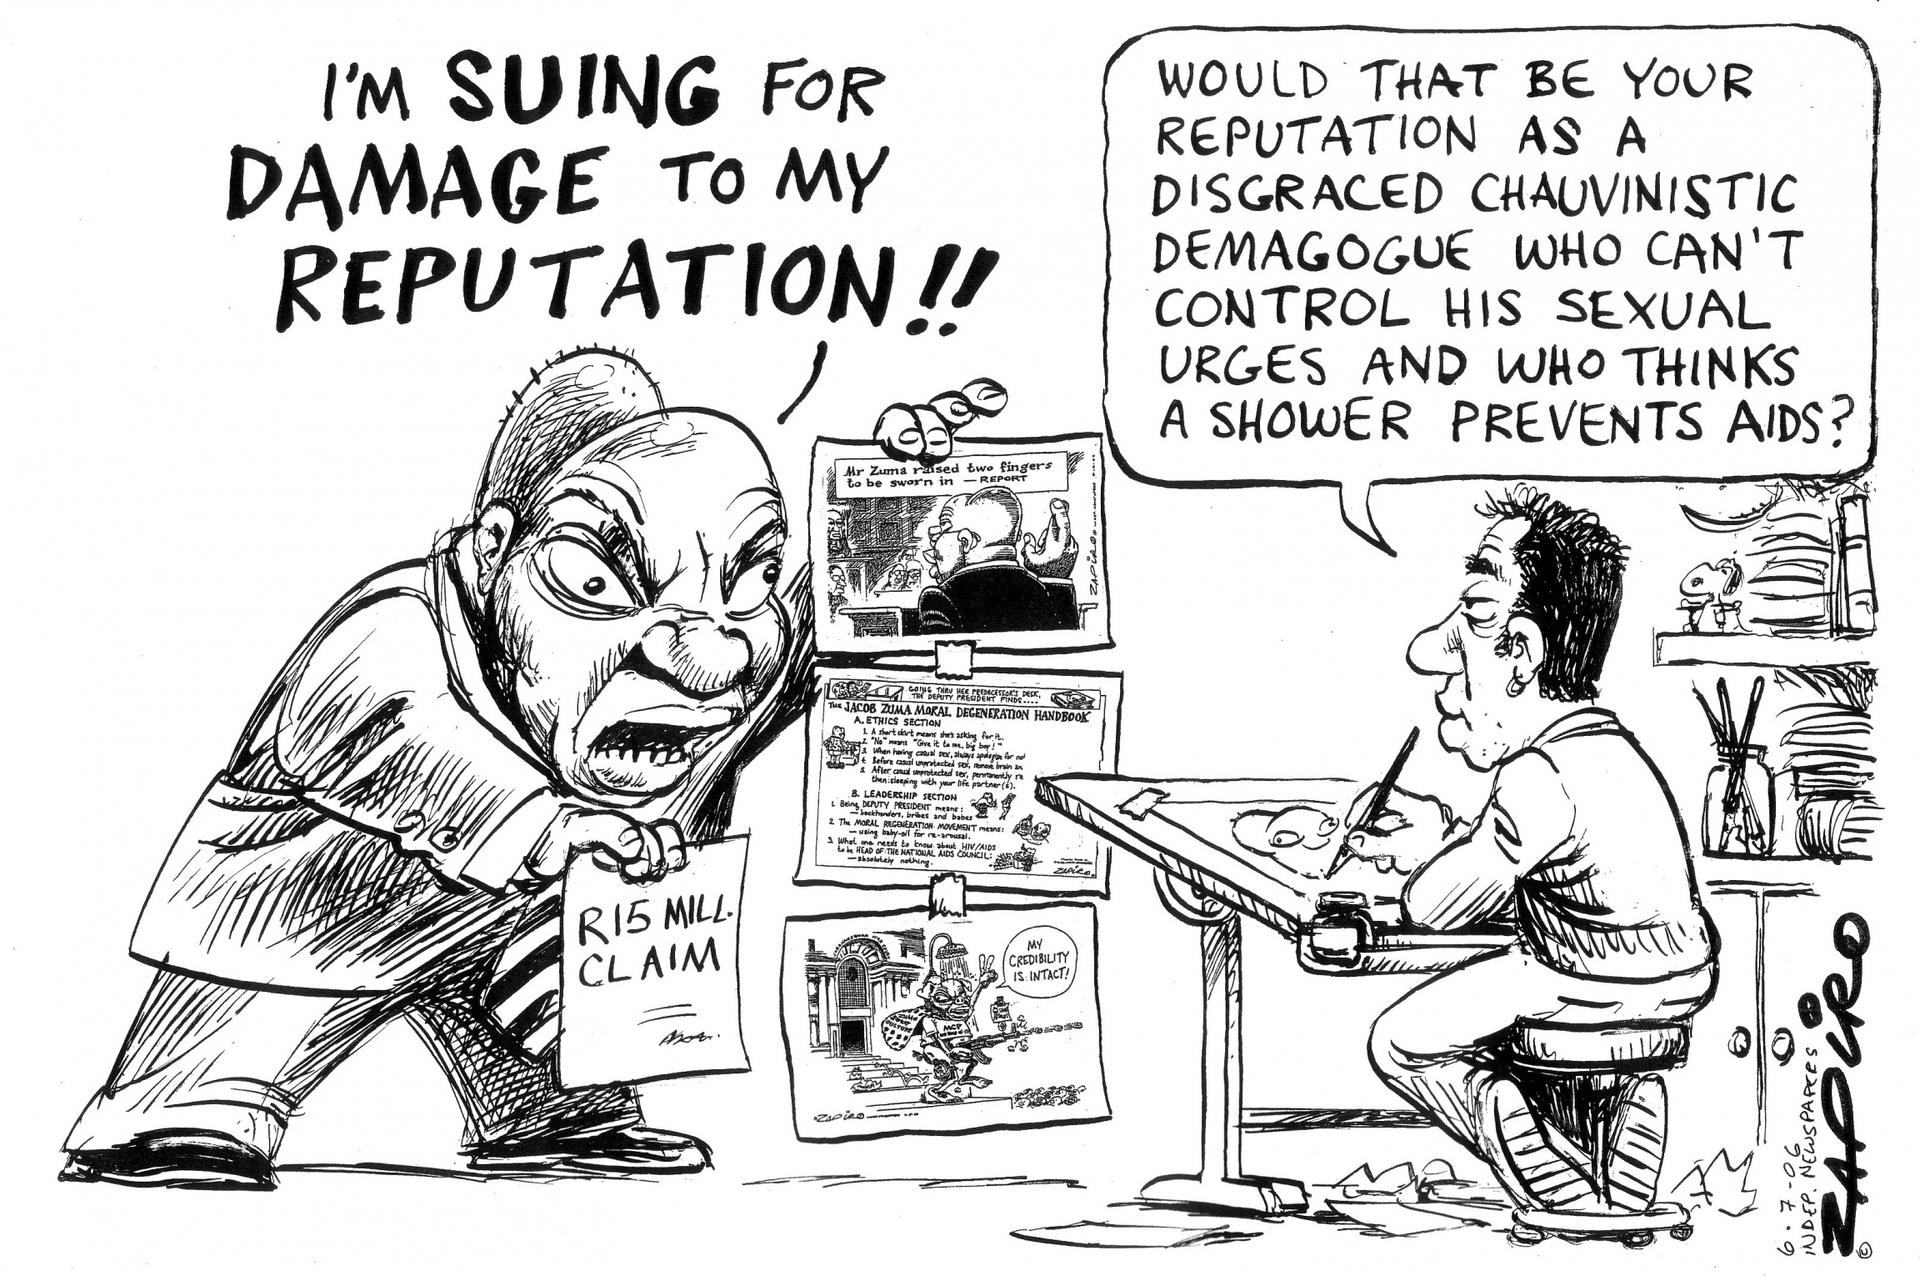 Cartoon shows Jacob Zuma yelling at Zapiro that he's suing him for defamation of character. Zapiro responds by impugning Zuma's character based on his actions. 